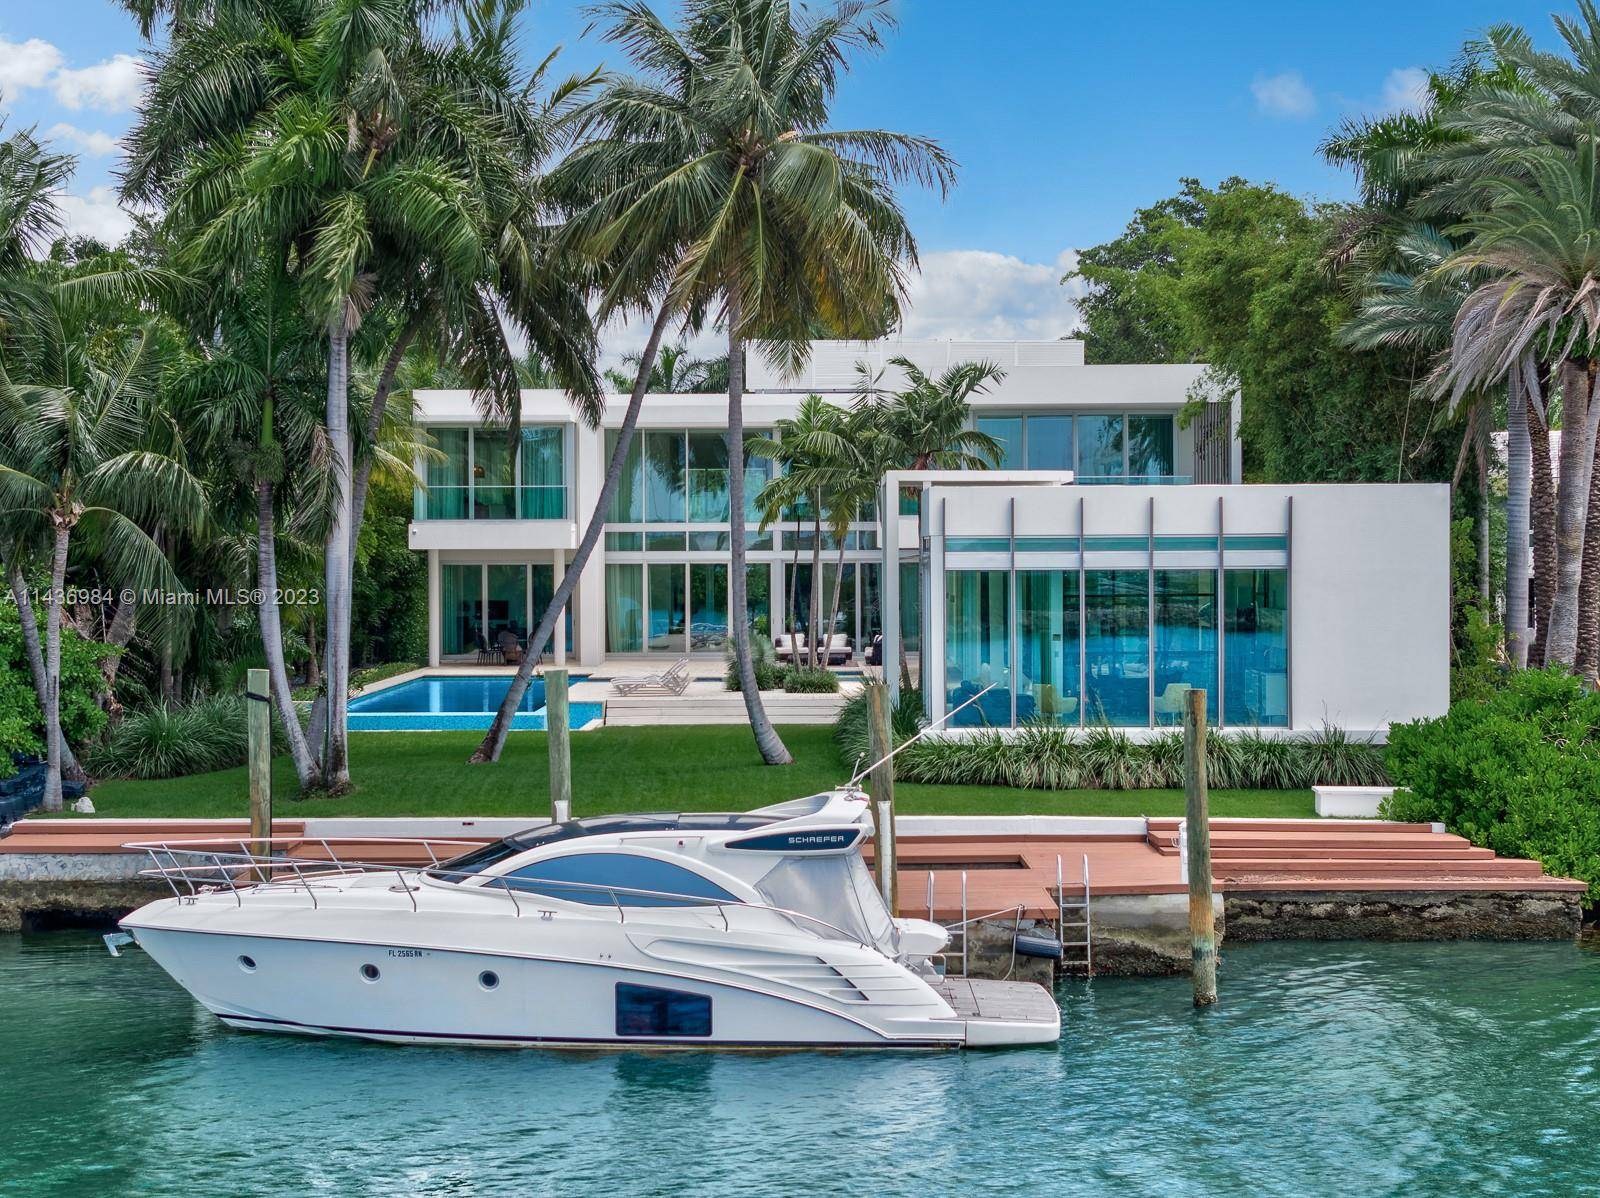 In a league of its own, this modern estate redefines luxury living on guard gated Palm Island.